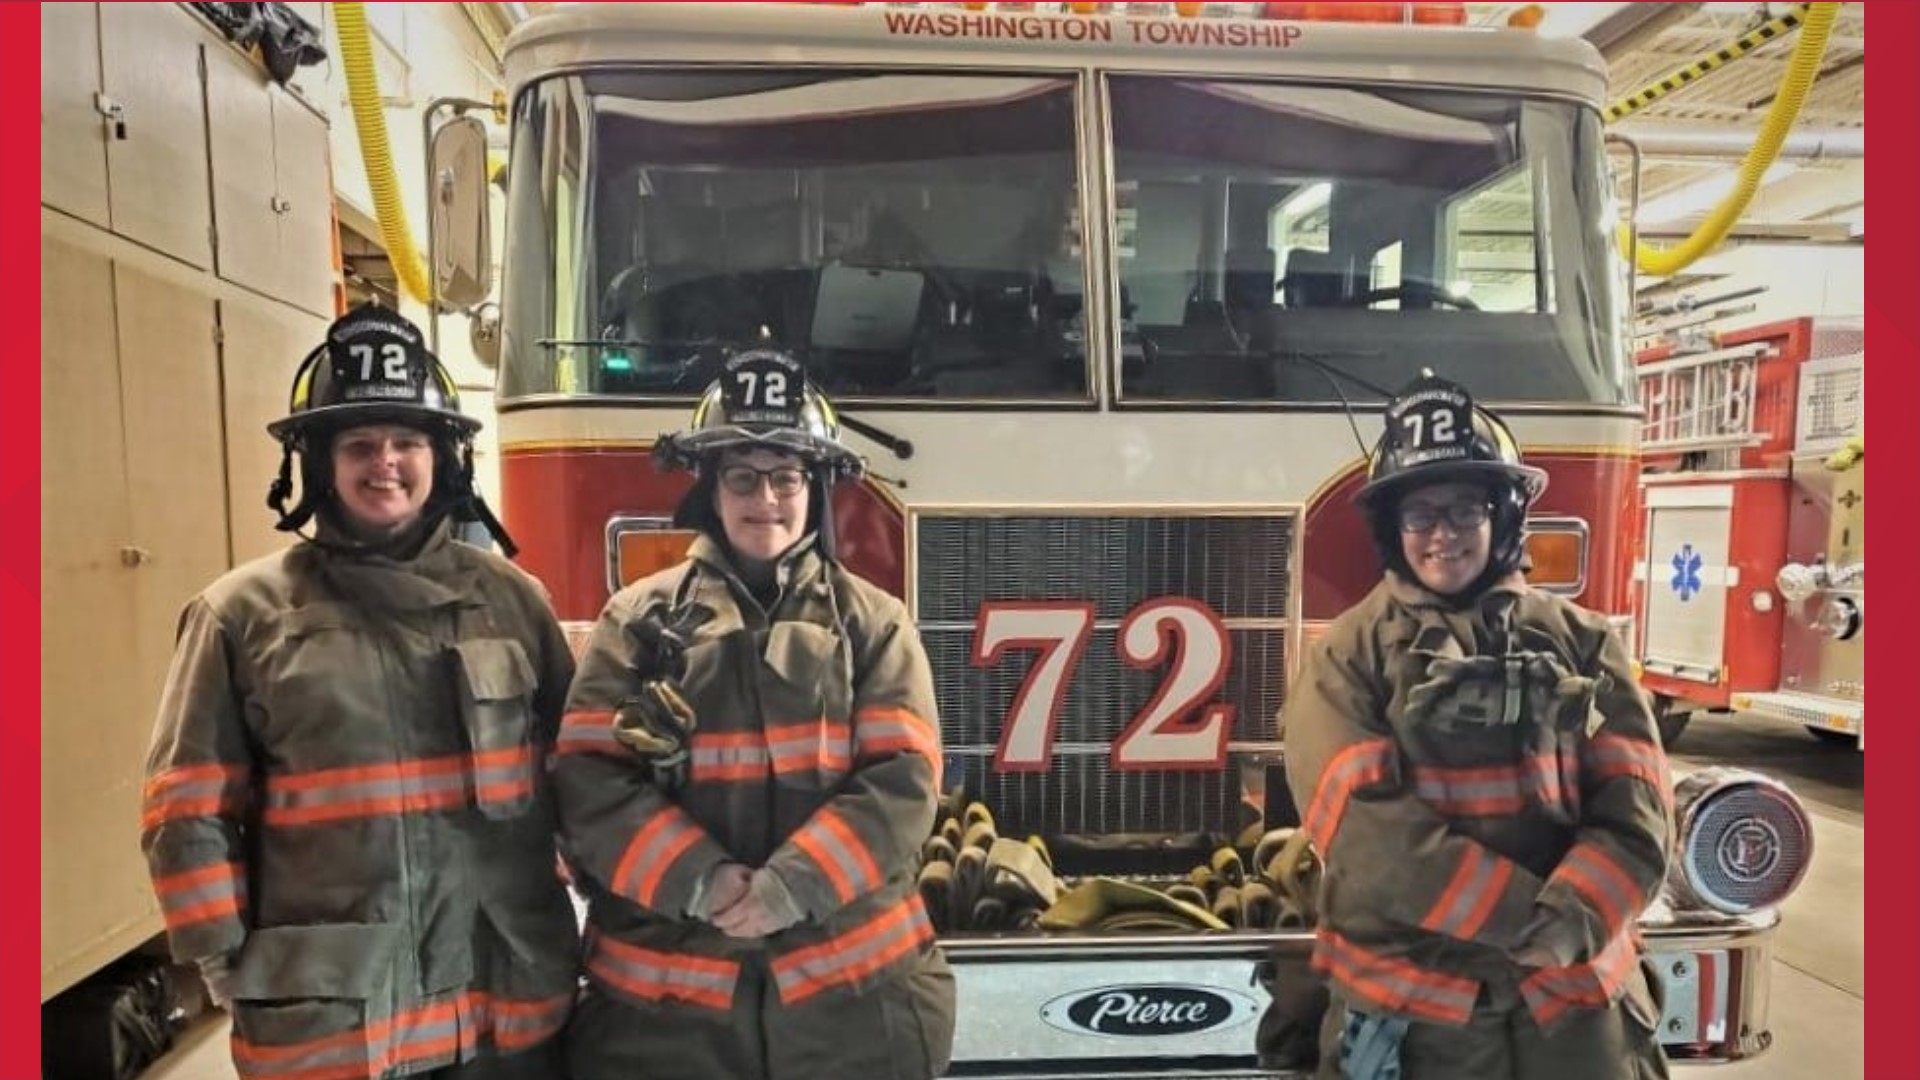 Ohio fire department responds to fire with first allfemale engine crew